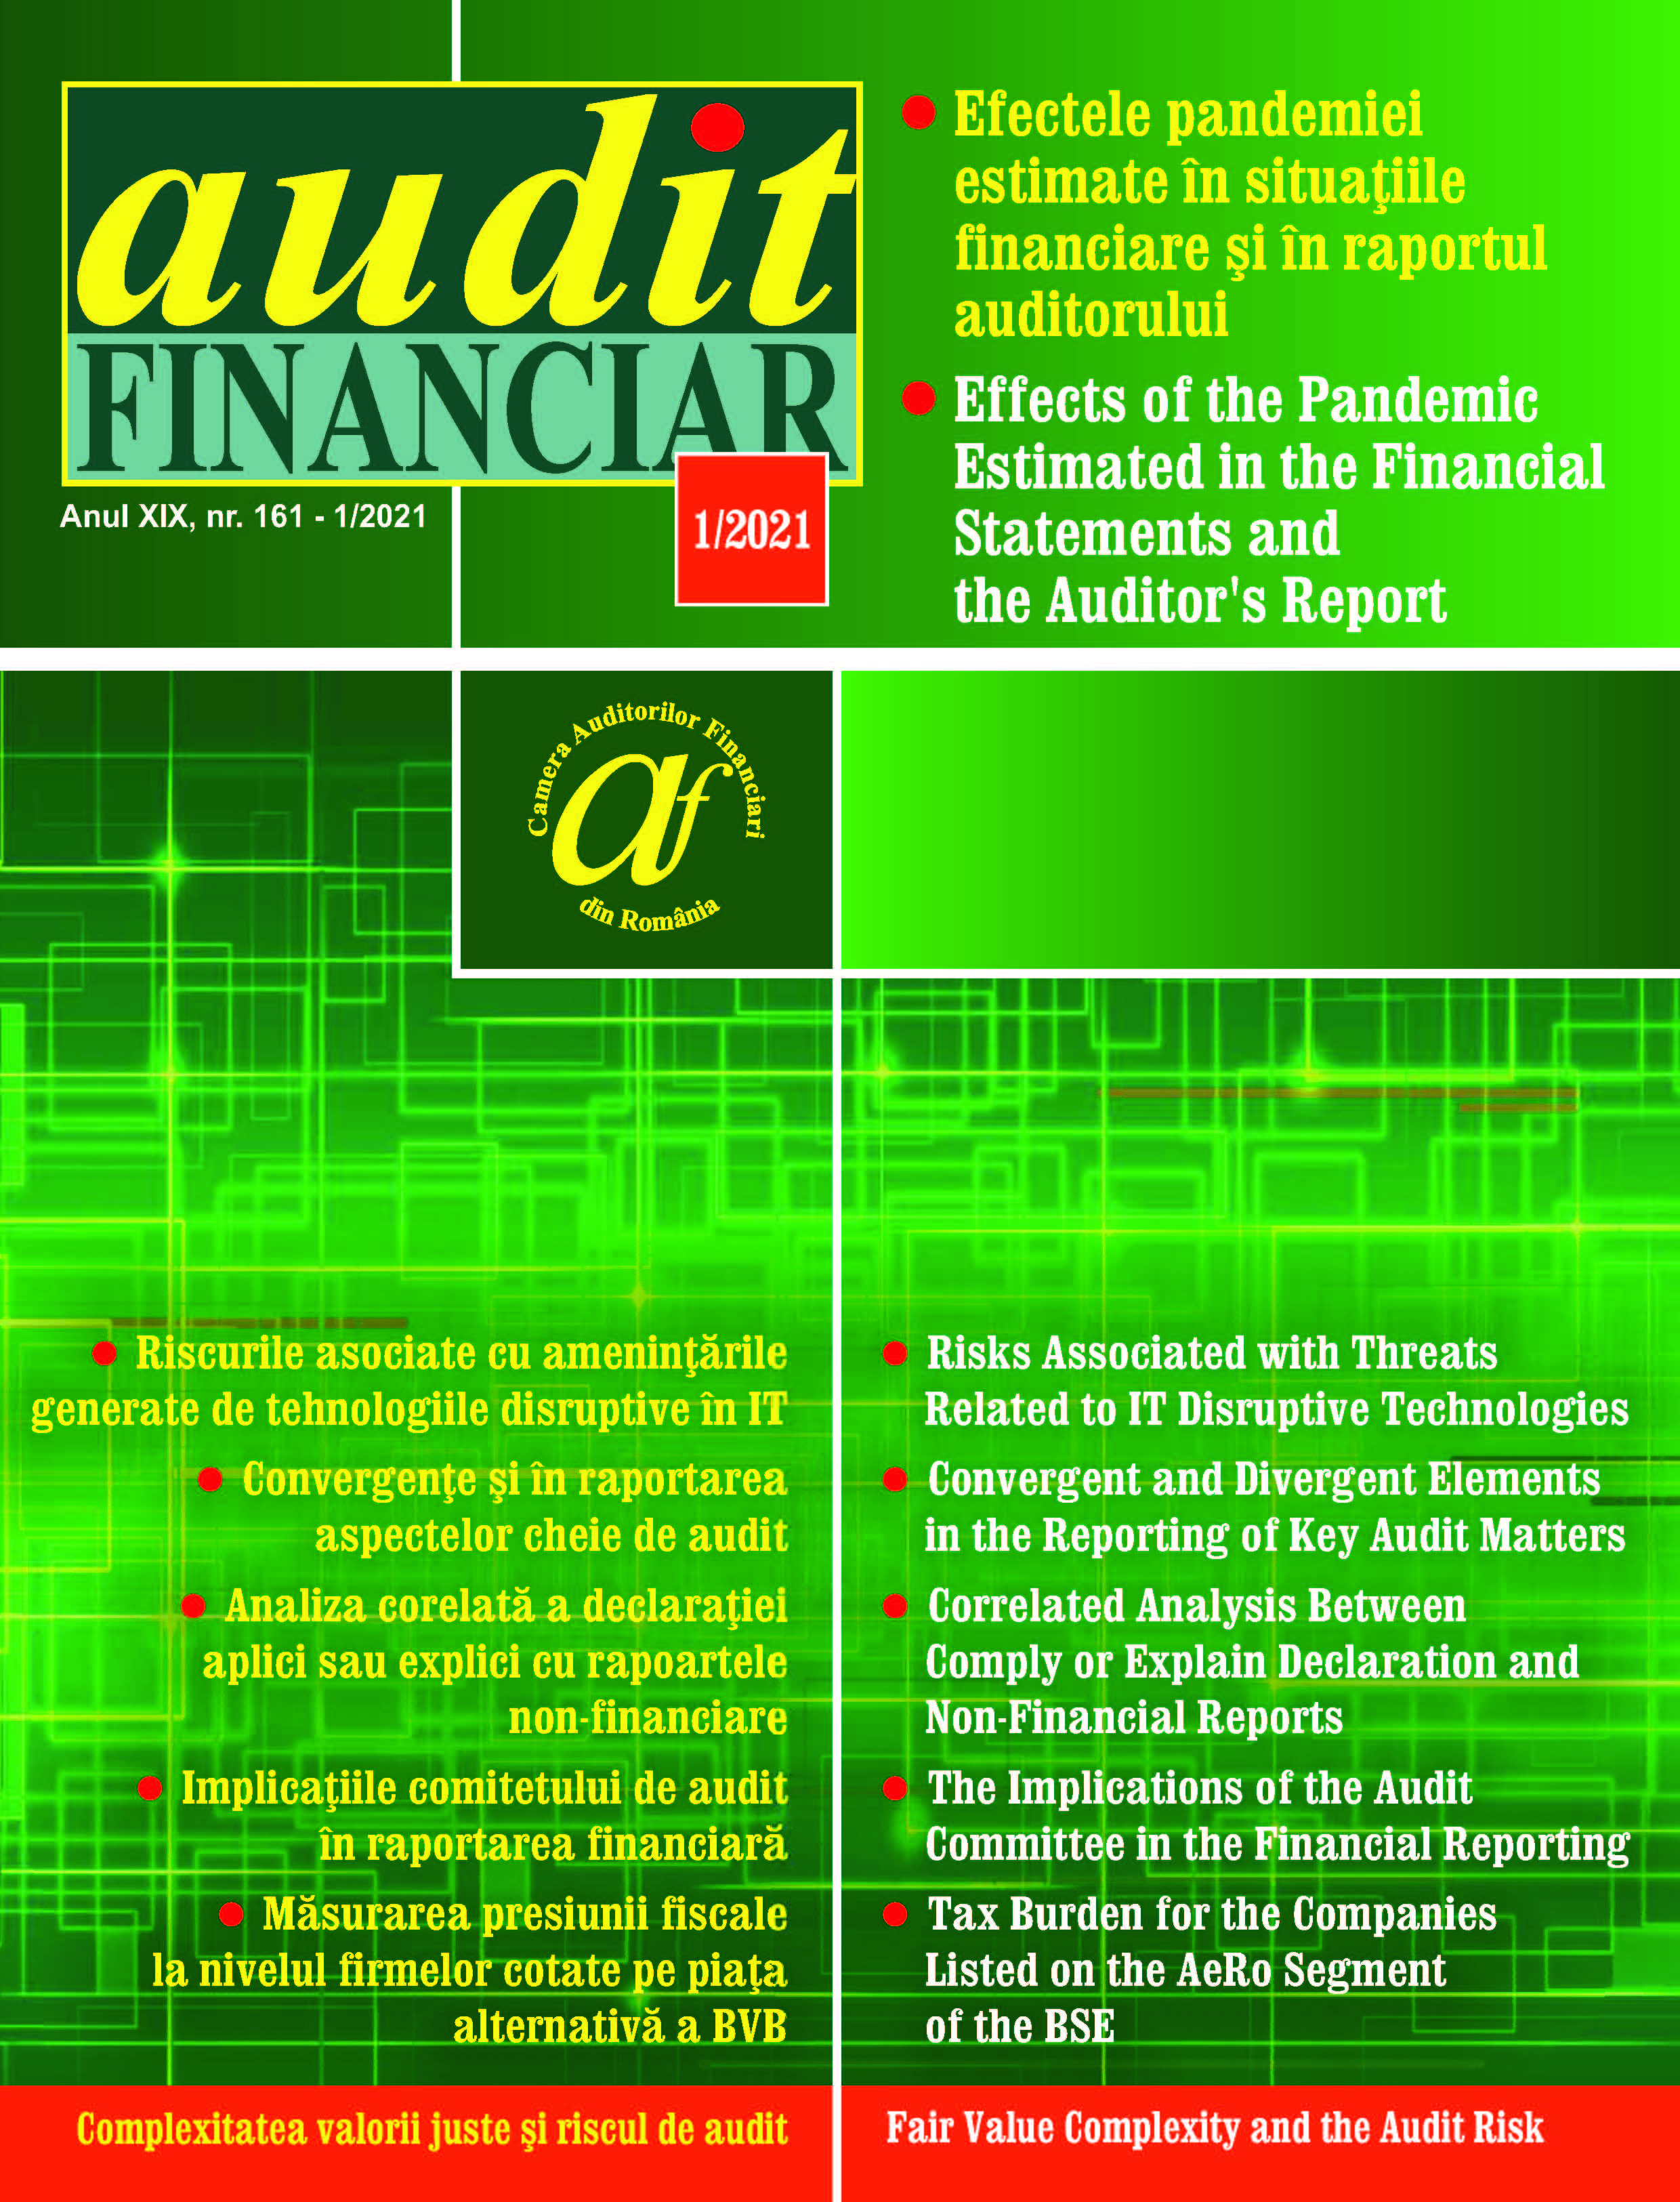 Risks Associated with Threats Related to Disruptive Technologies in the Current Financial Systems Context Cover Image